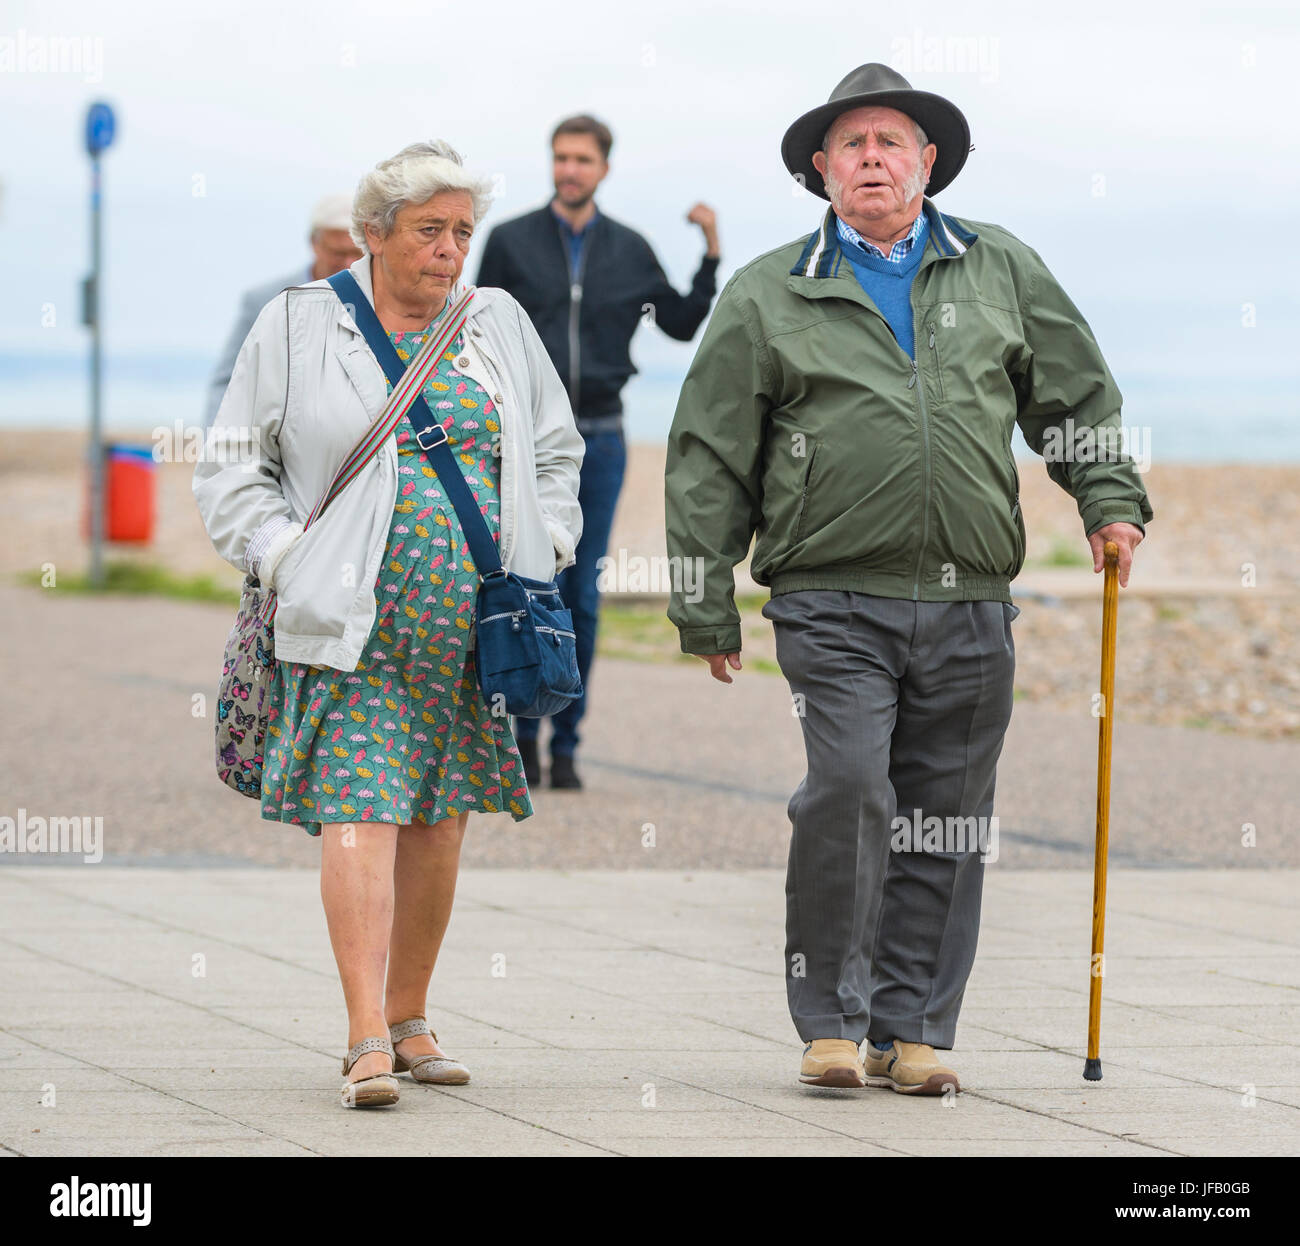 Elderly couple and man with a walking stick walking along with hat and coats. Stock Photo